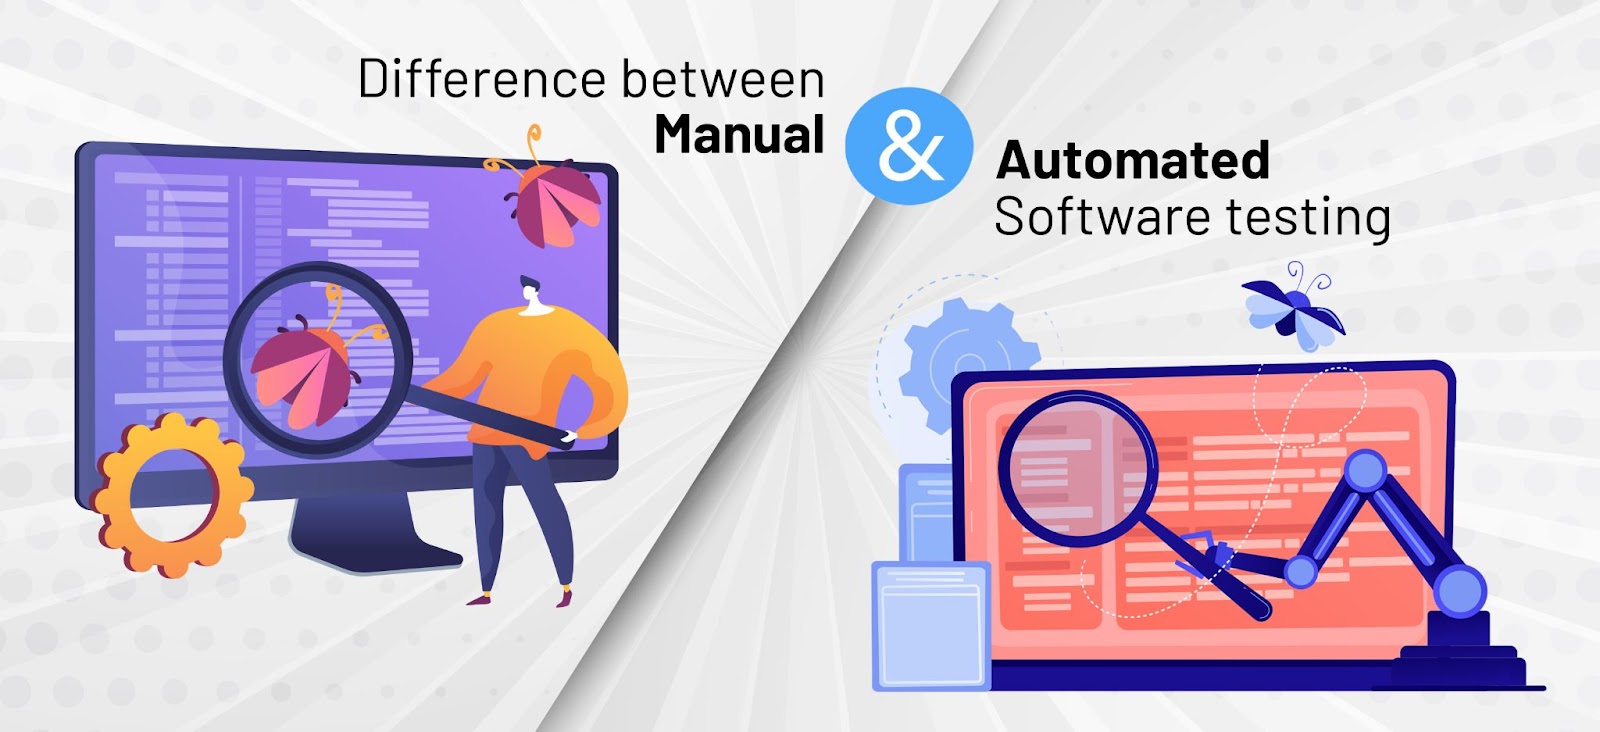 Difference between Manual & Automated Software testing